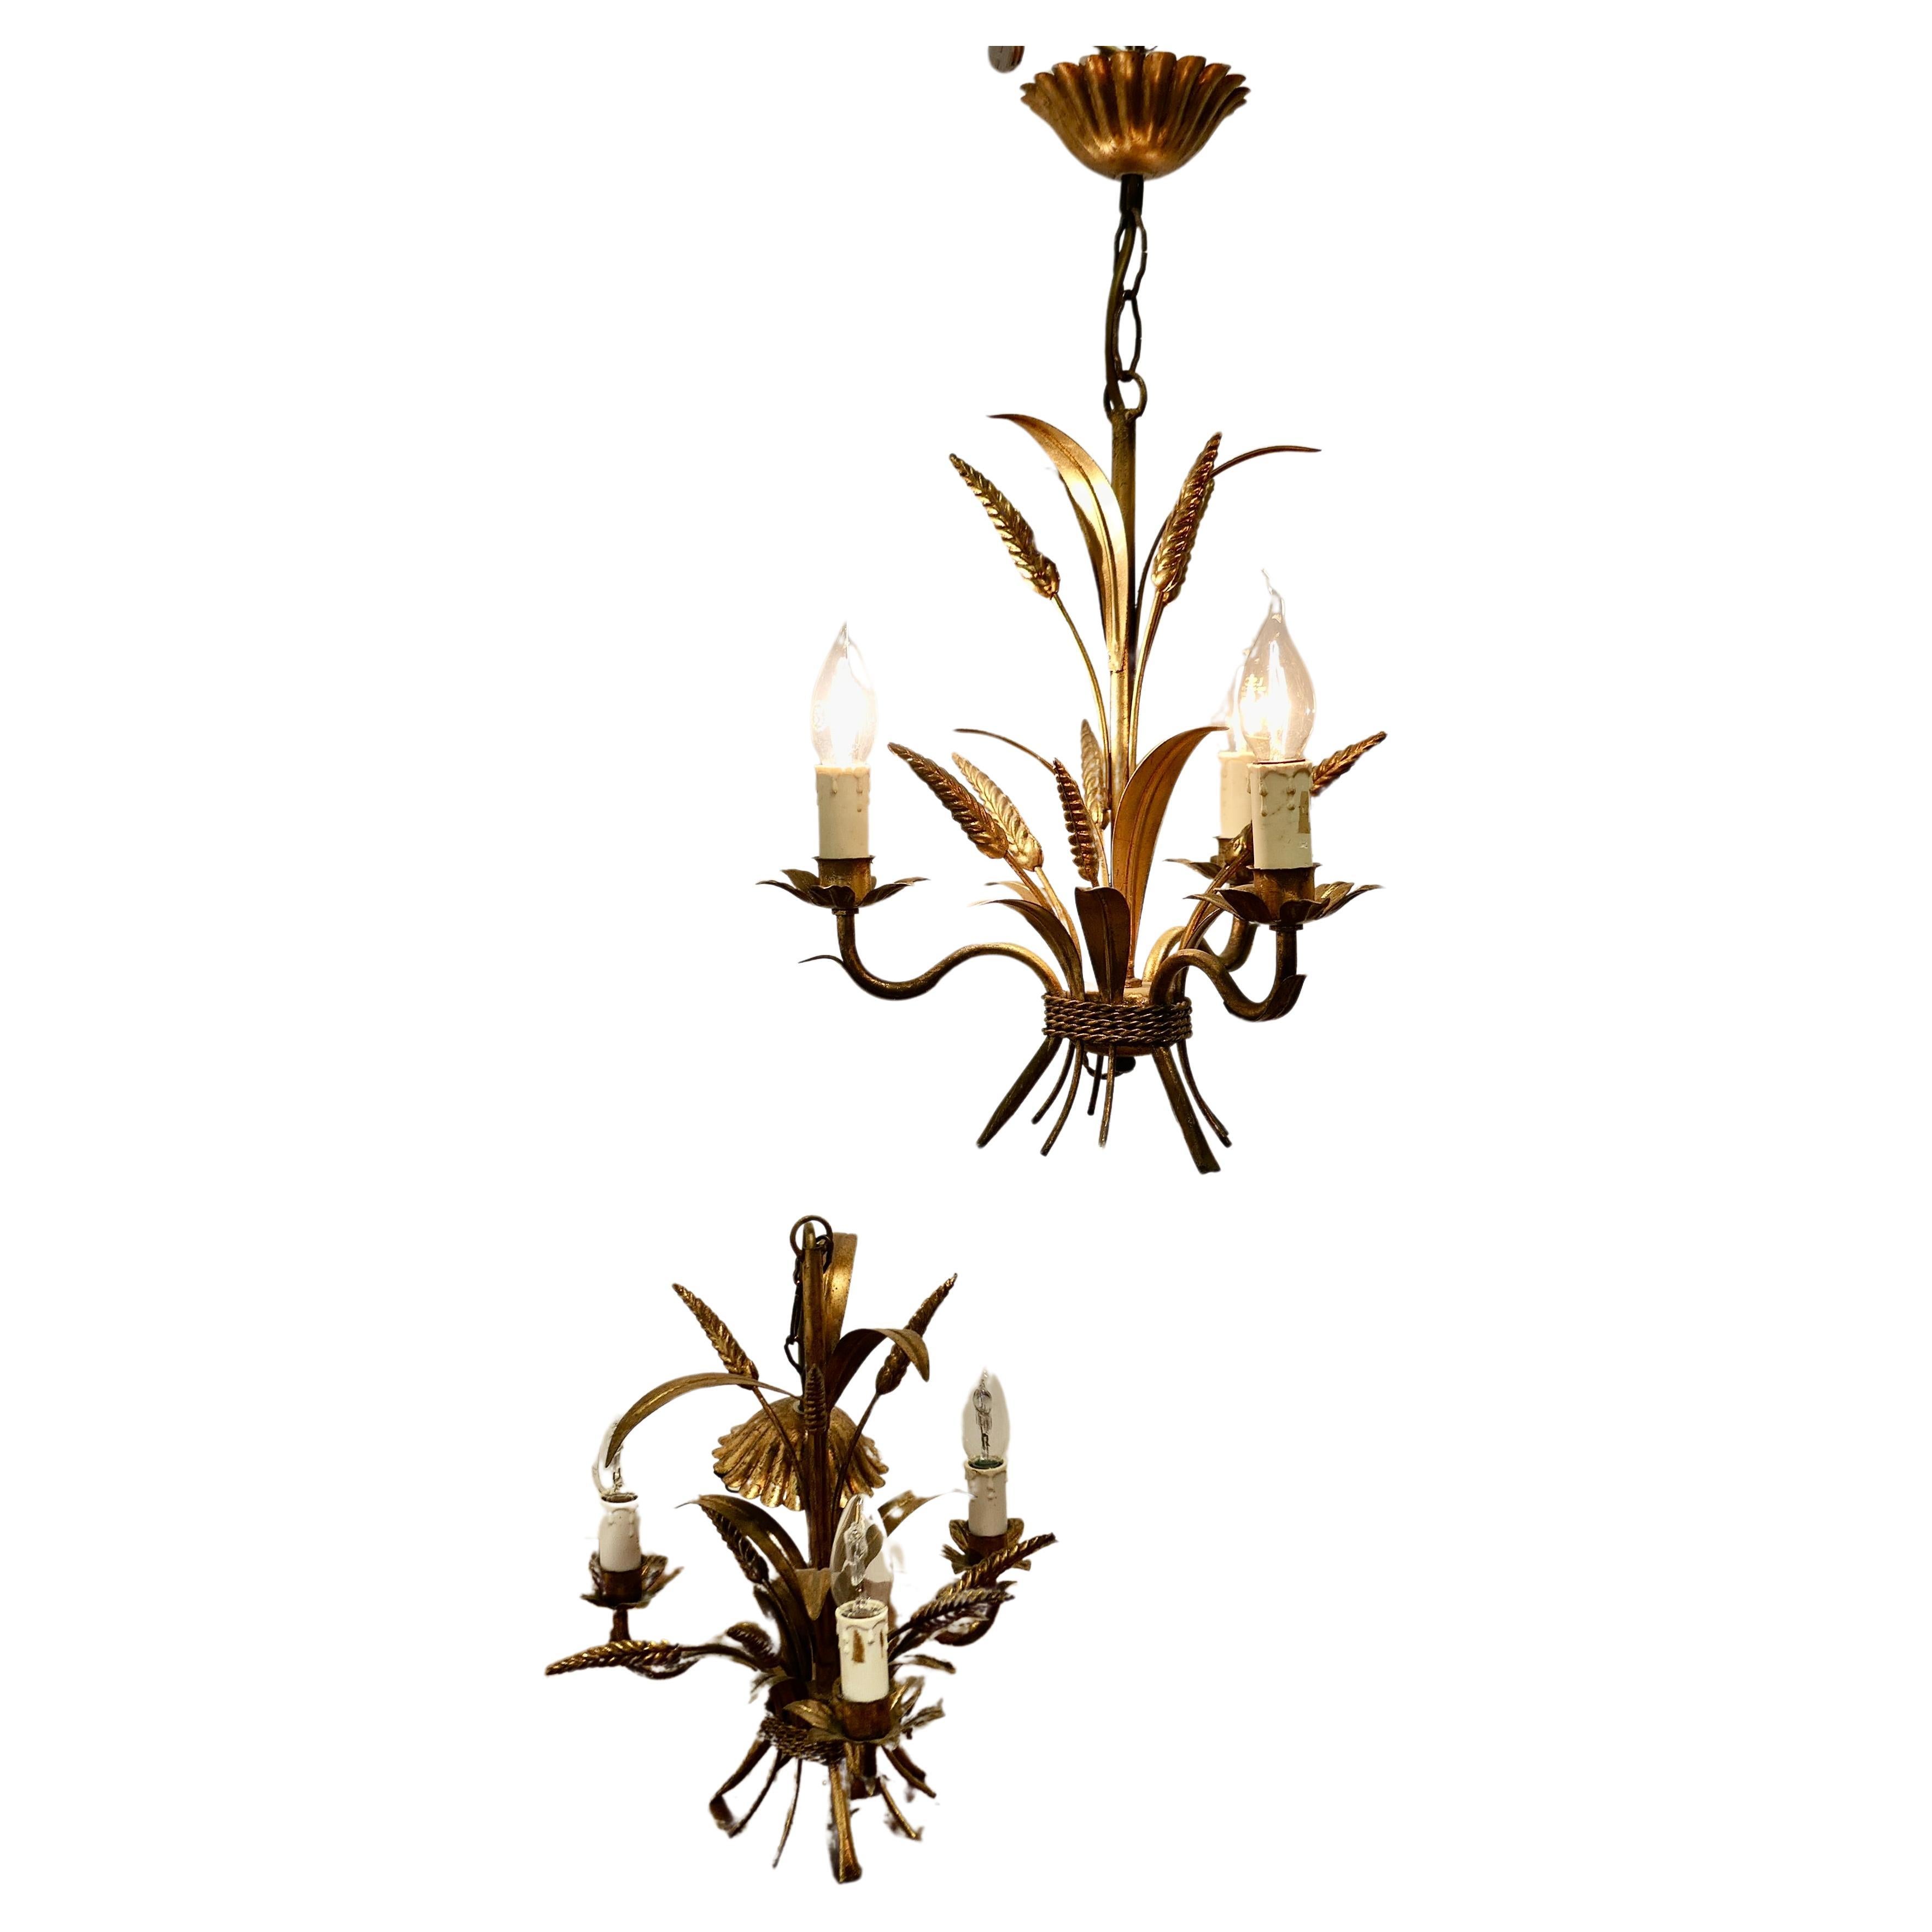 A Pair of Matching French Toleware Gilded Pendant Lights  These are very pretty 